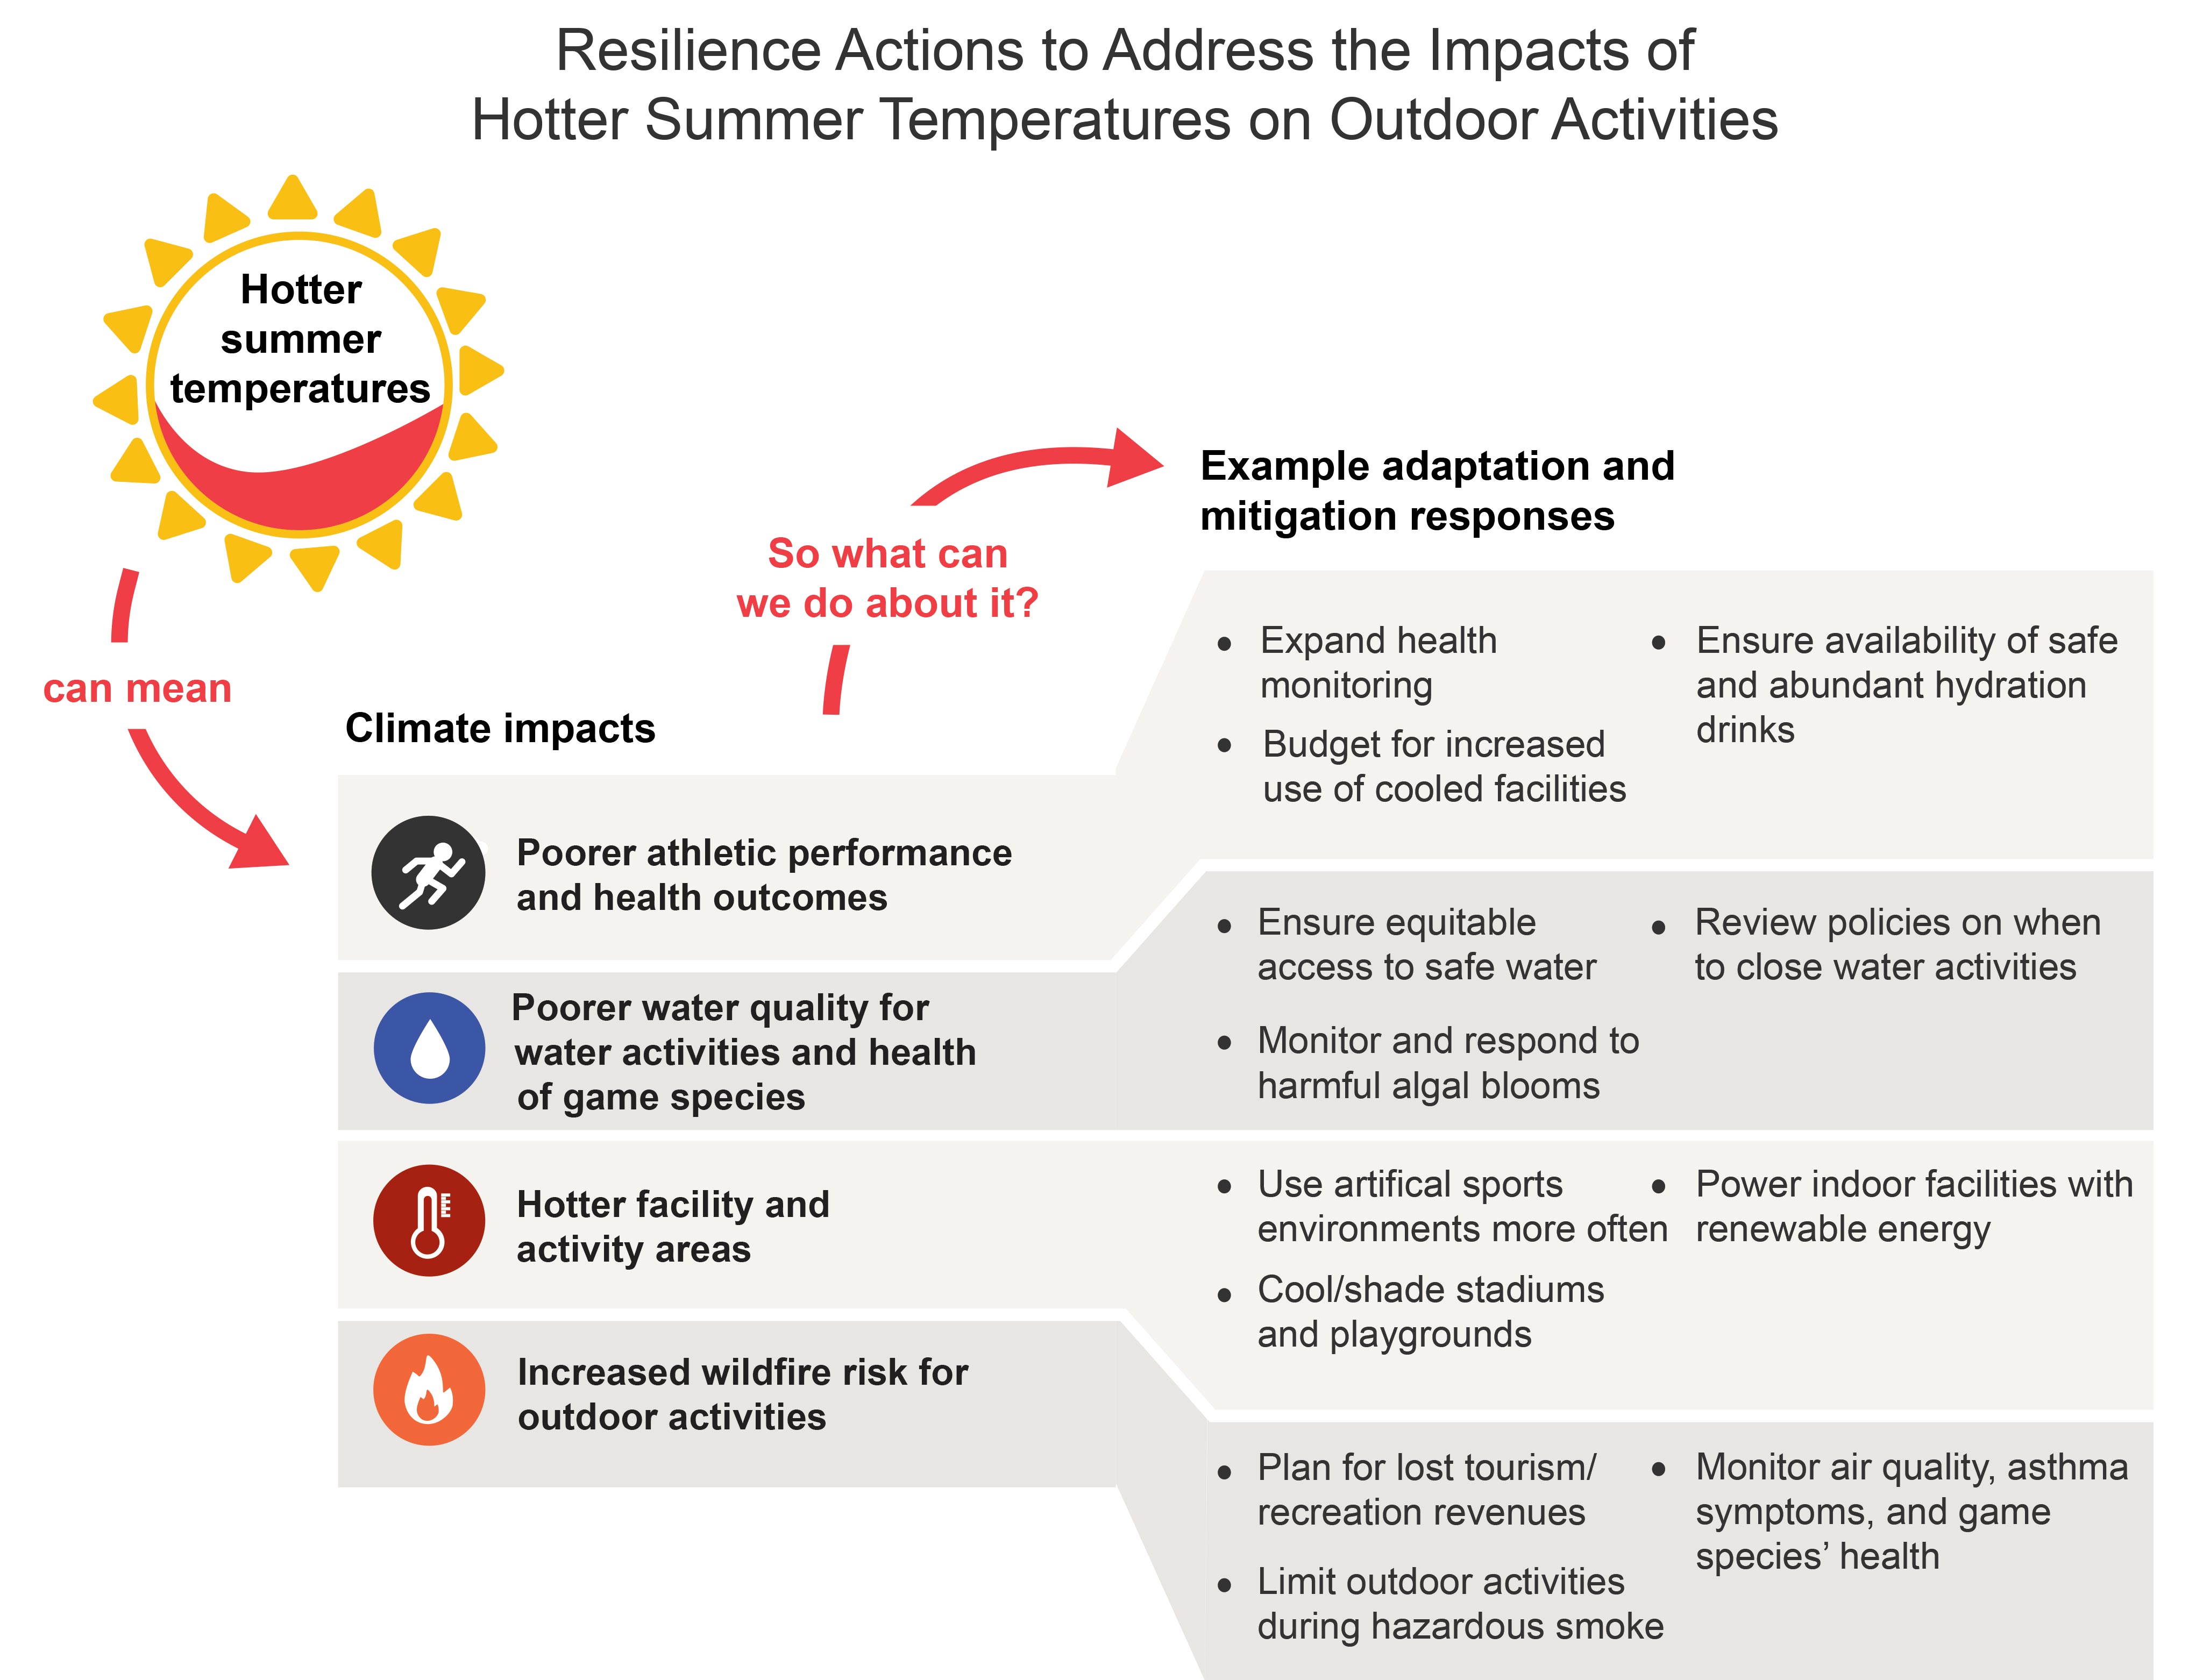 Resilience Actions to Address the Impacts of Hotter Summer Temperatures on Outdoor Activities